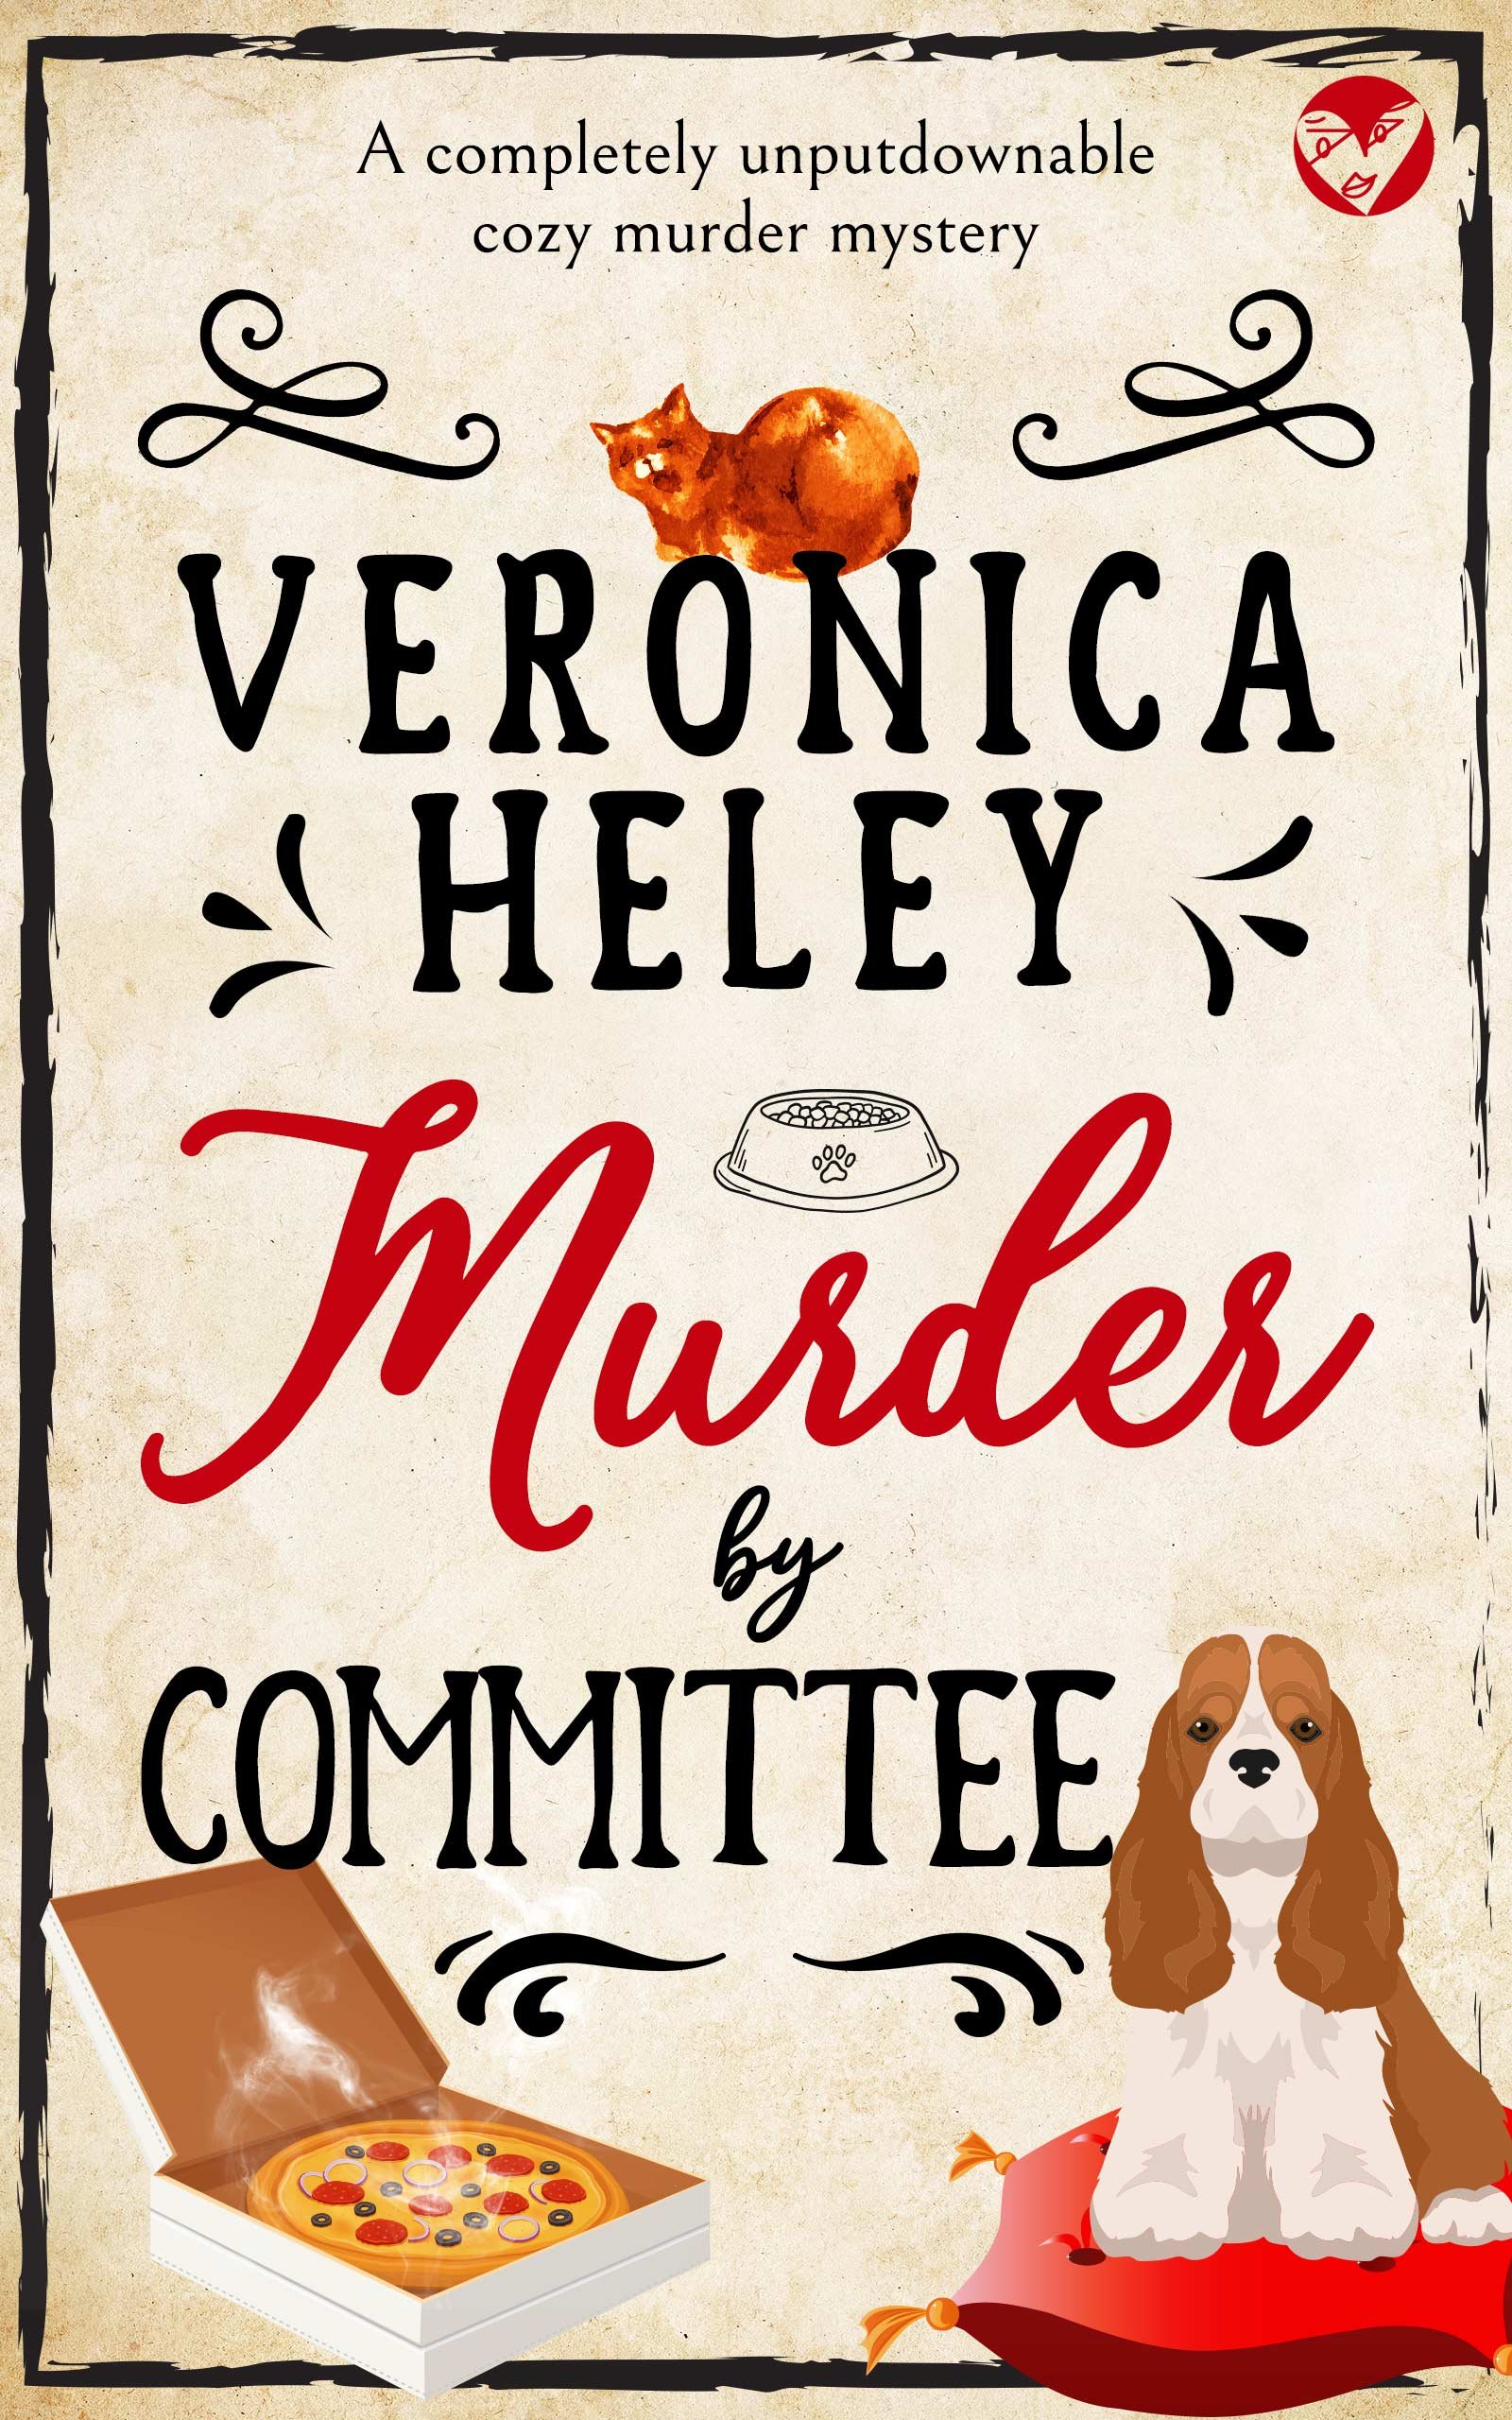 MURDER BY COMMITTEE 504k cover publish.jpg